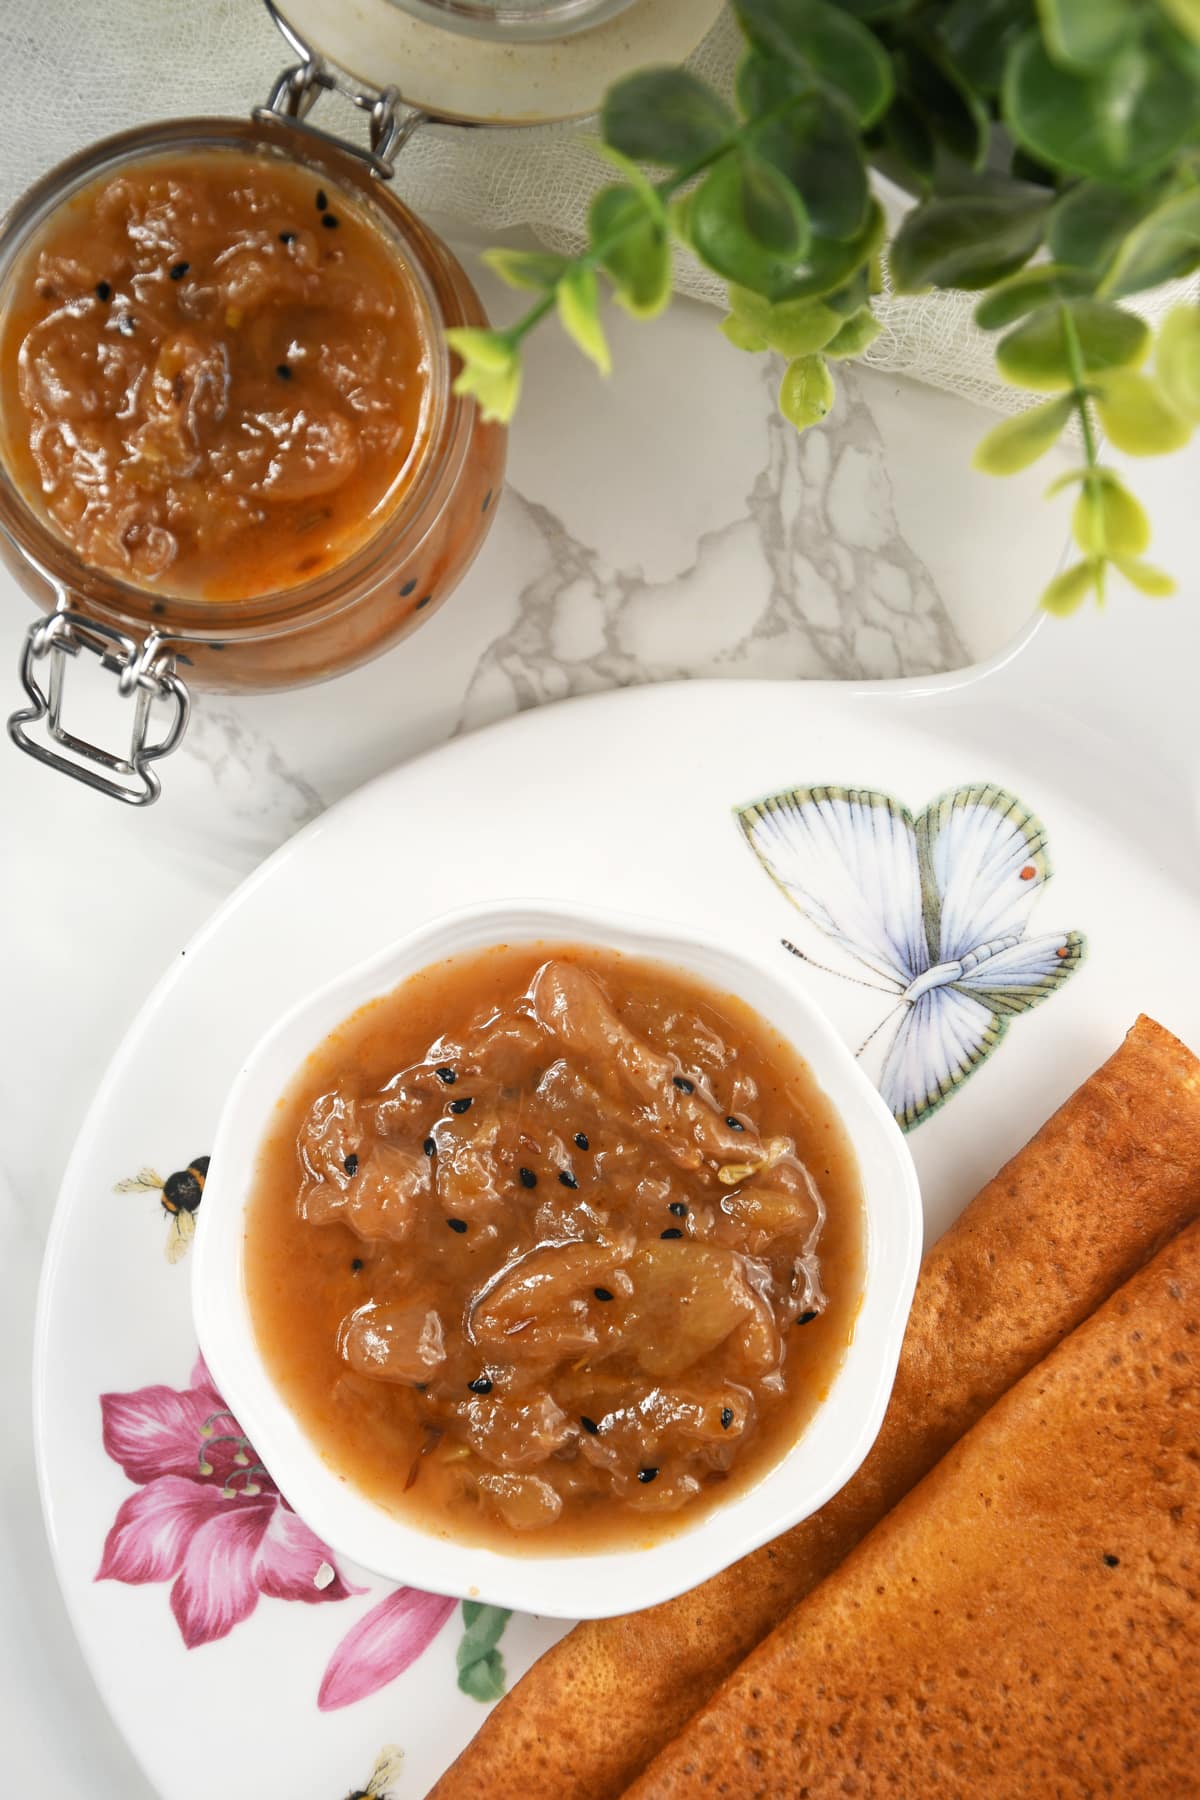 Grapes chutney served with flat bread made of lentils.